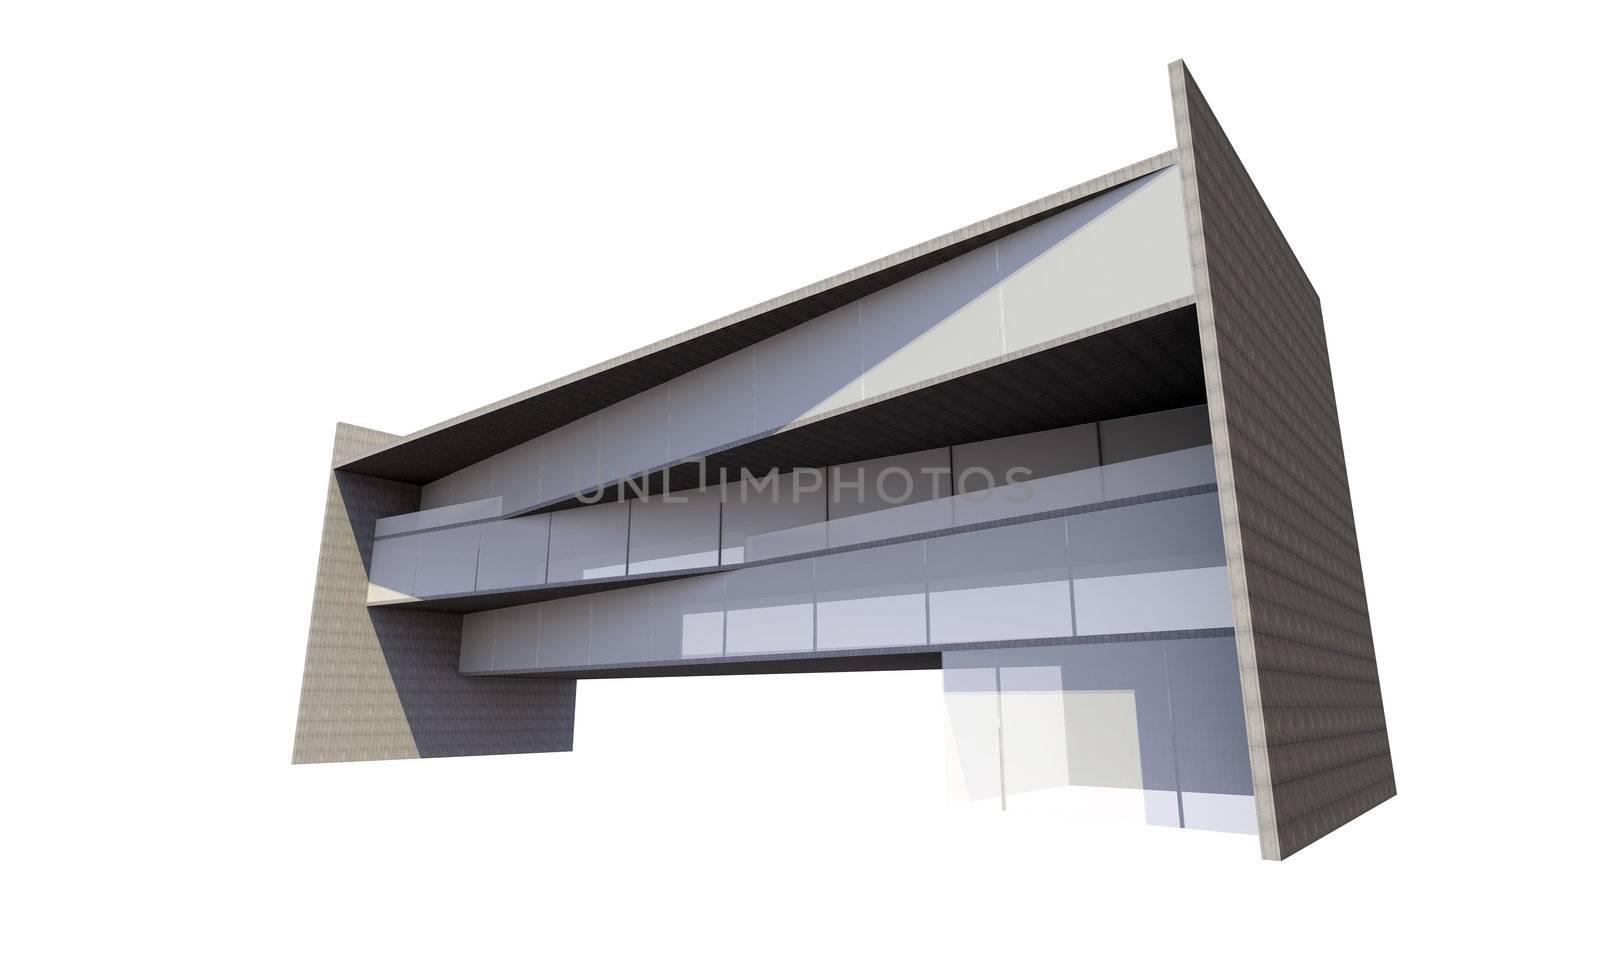 3D modern building isolated on white.